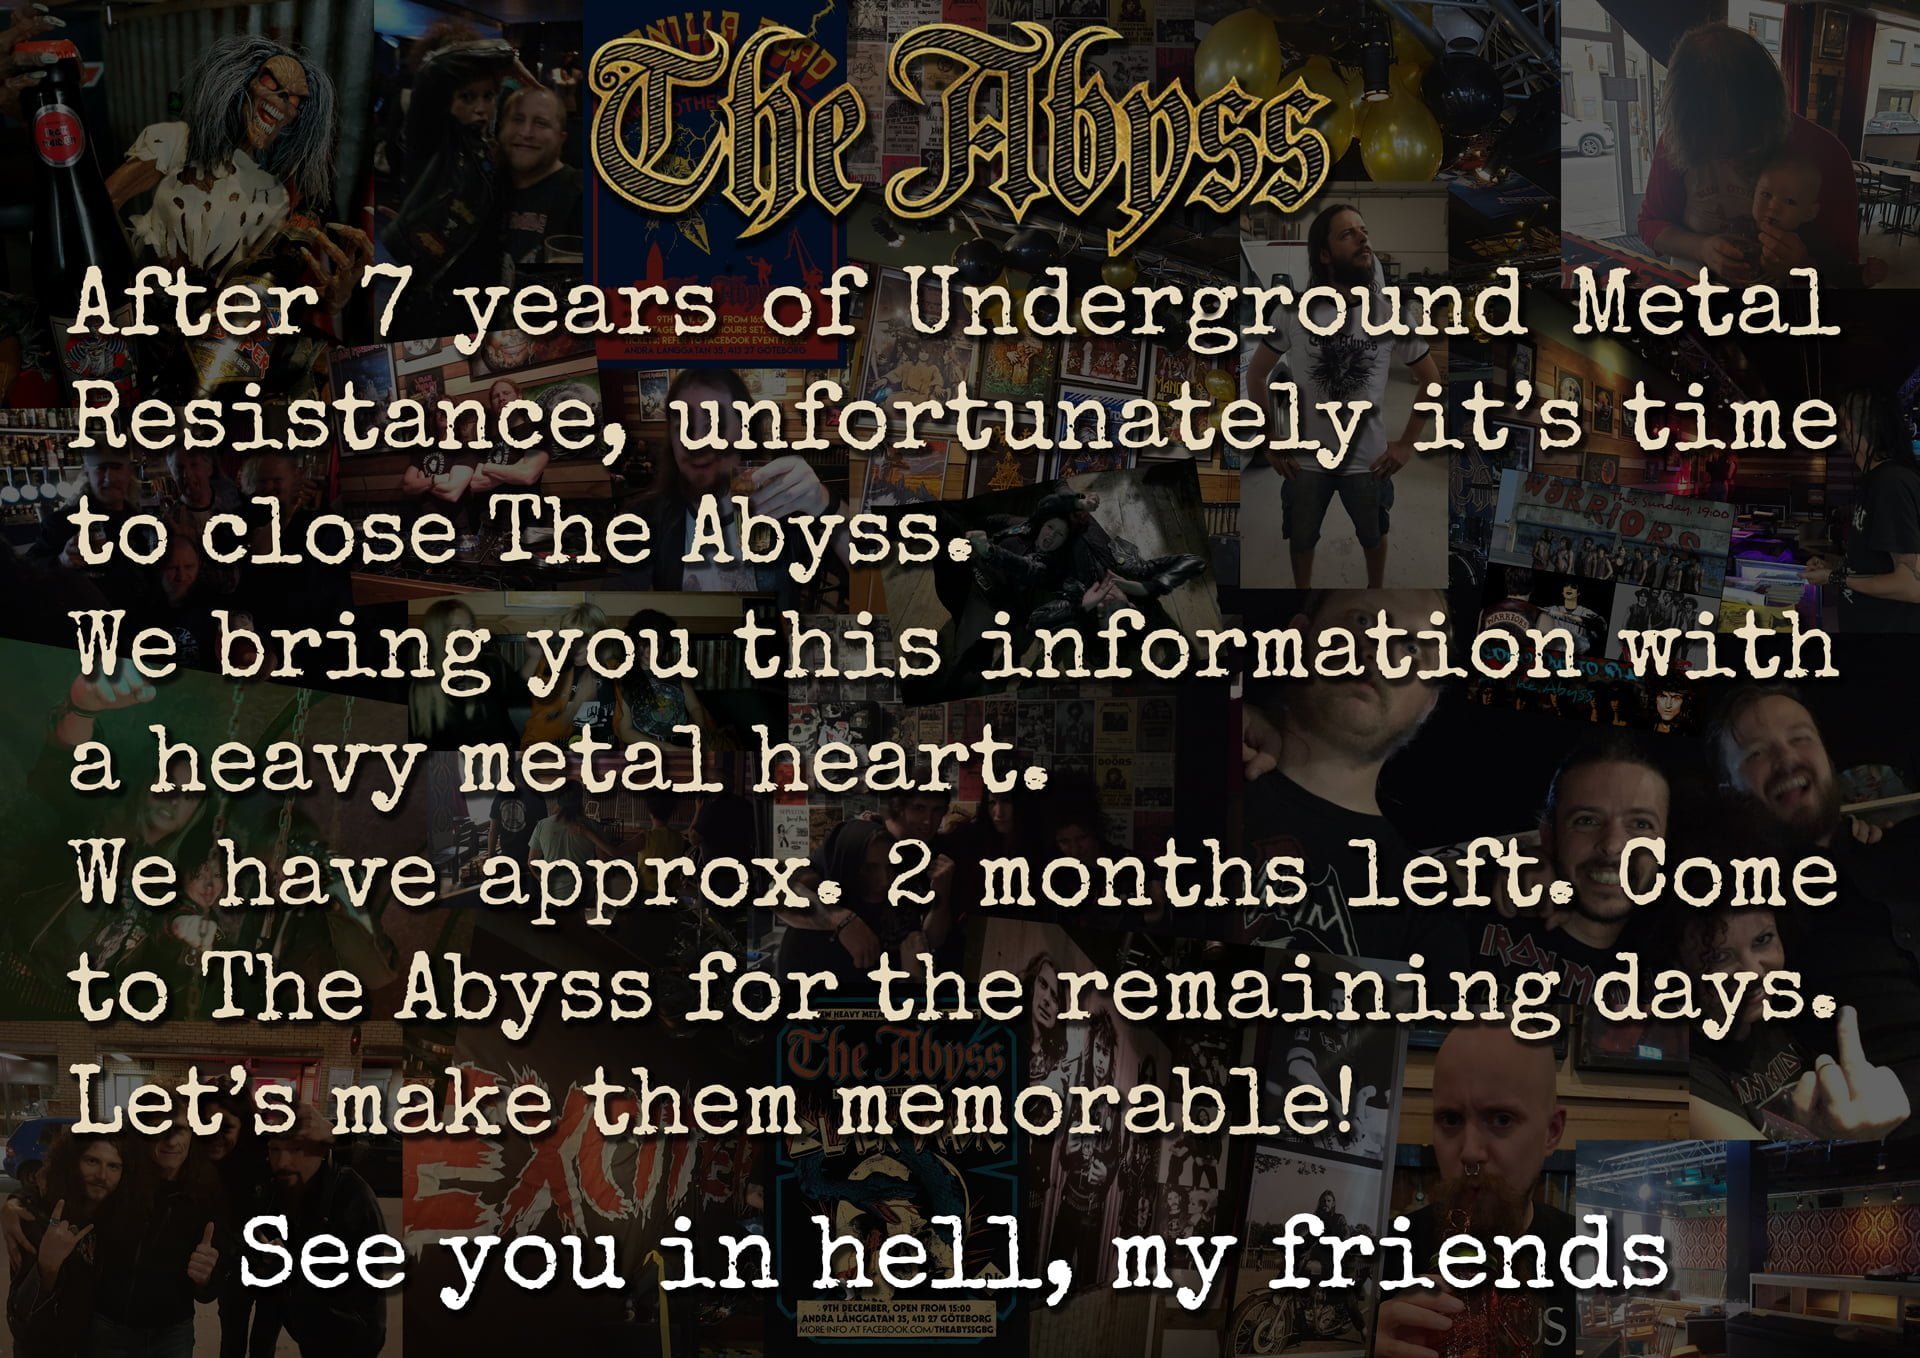 The Abyss - 7 Years close